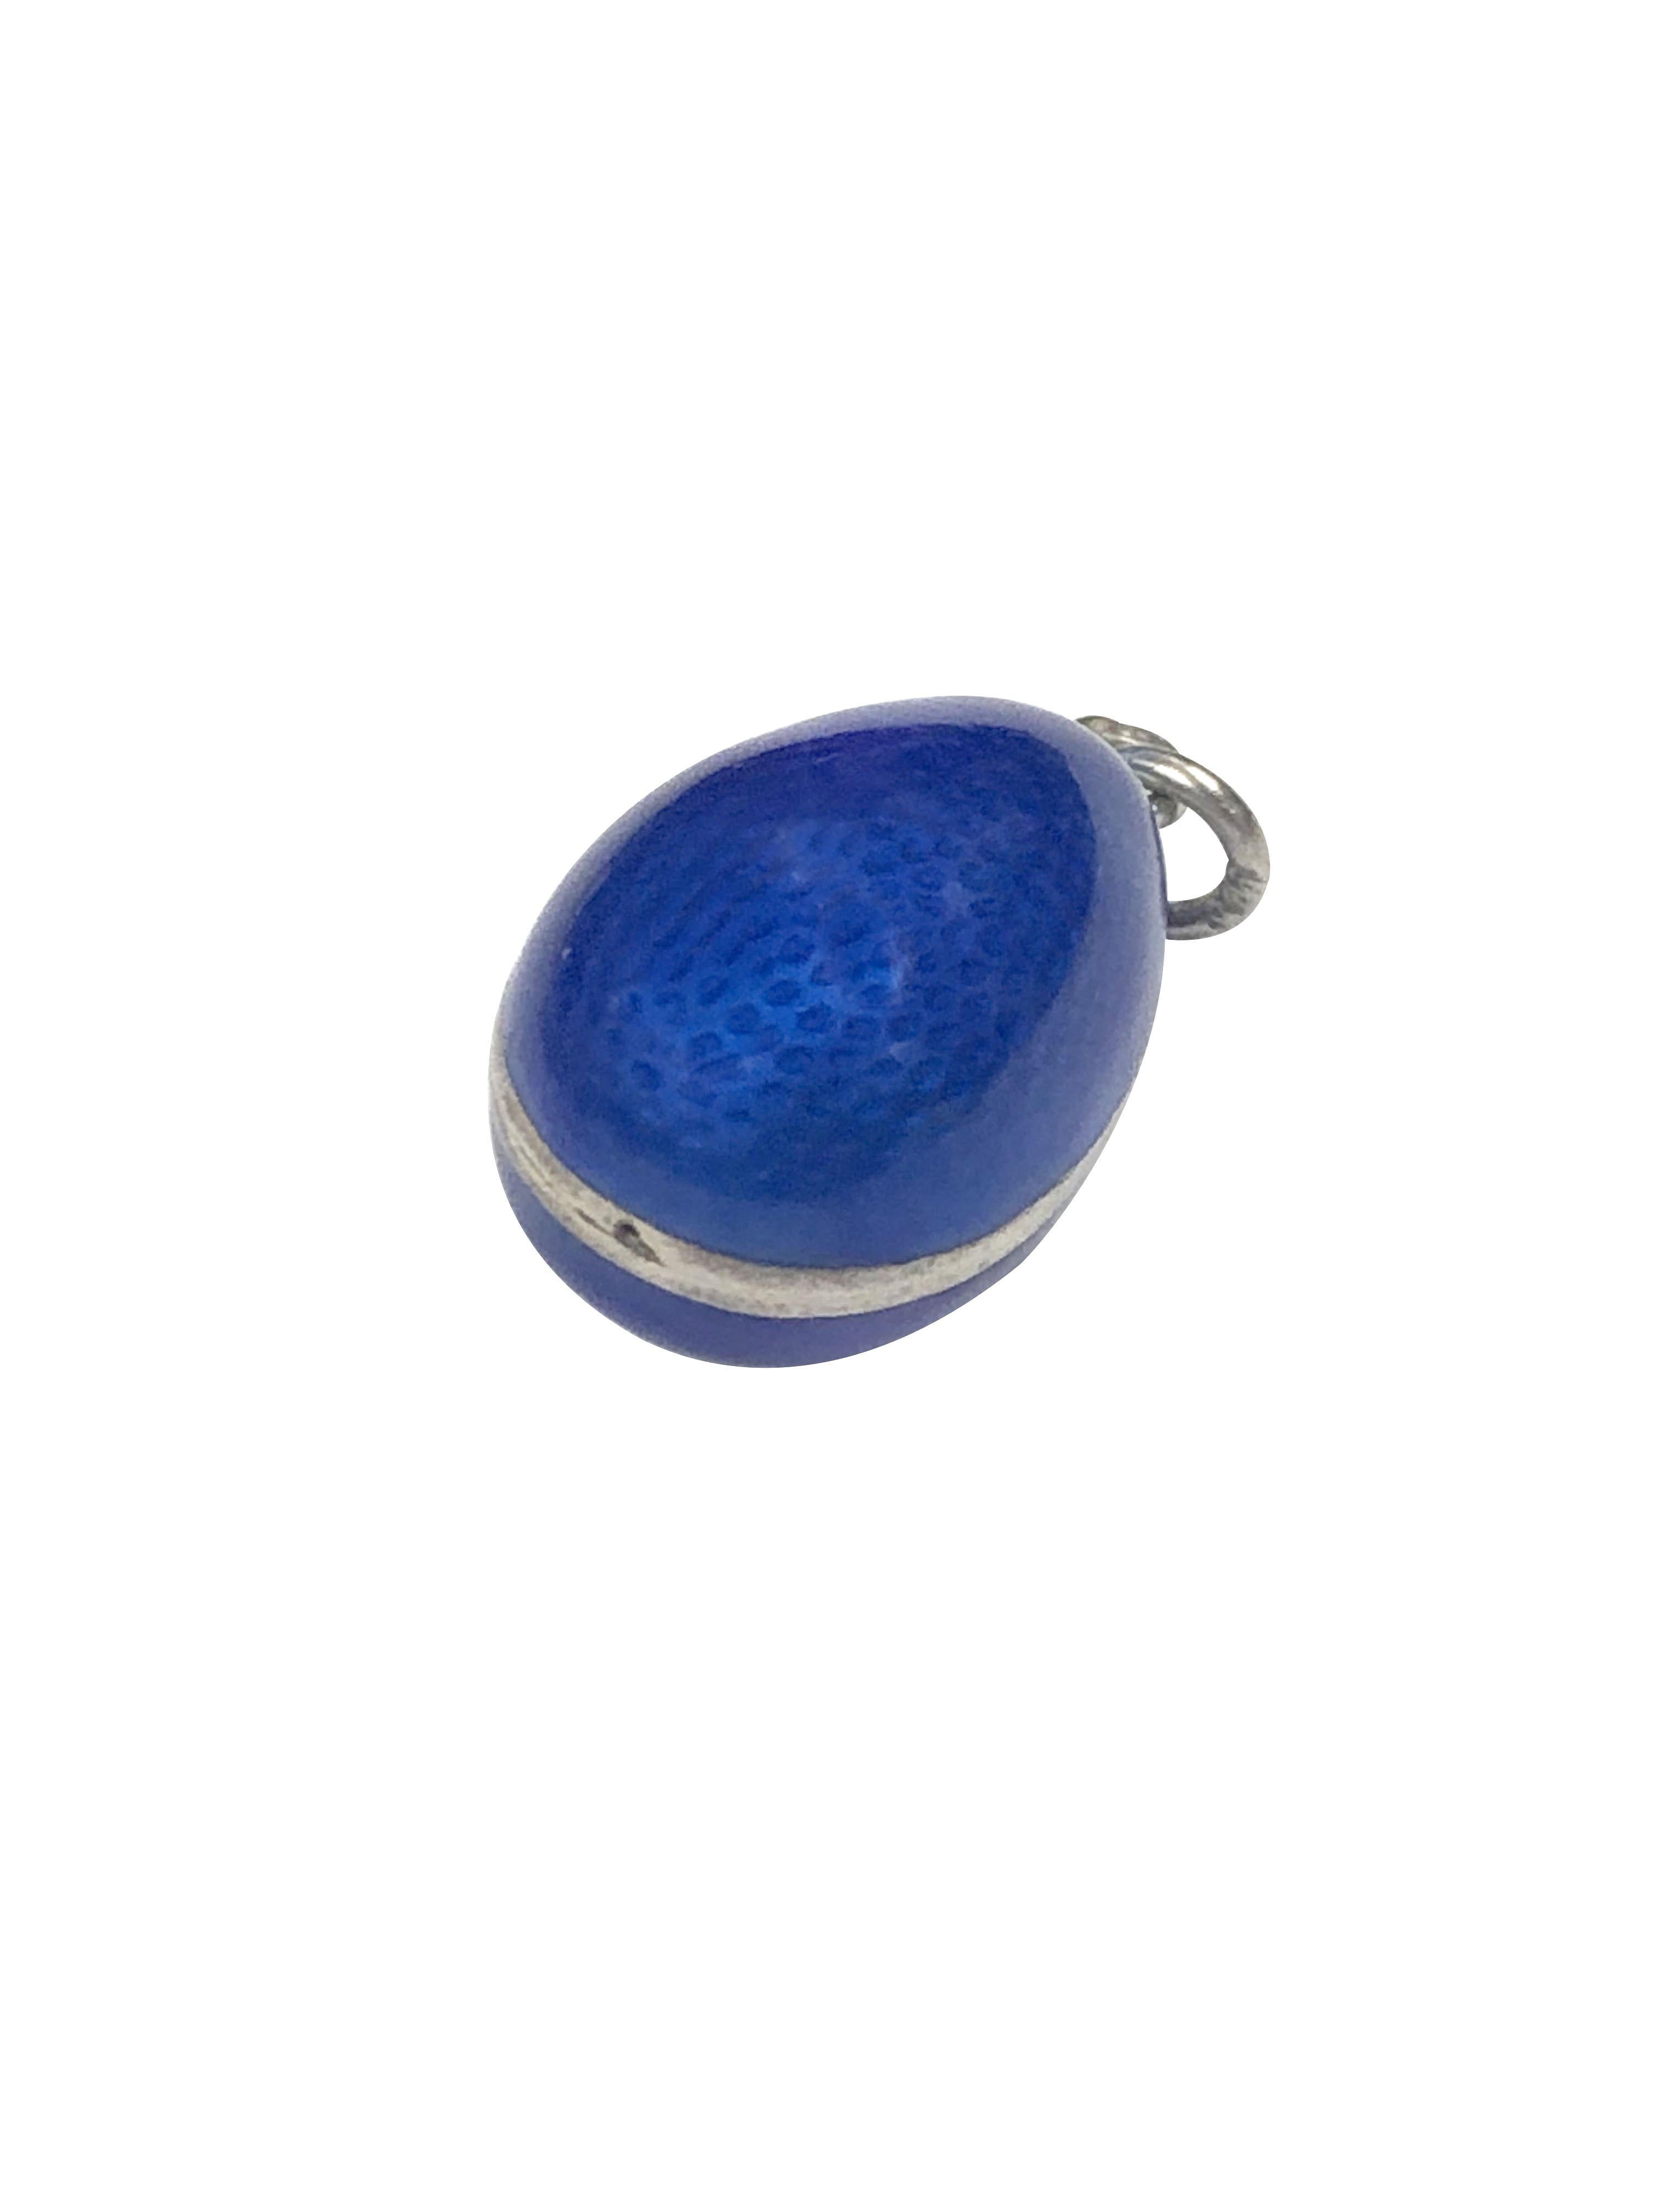 Circa 1900 - 1910 Carl Faberge 84 Silver Egg Pendant, measuring 3/4 inch in length with Cobalt Blue Guilloche Enamel and centrally set with a Rose Cut Diamond, having a stamp for Moscow and a Cyrillic stamp of Carl Faberge. Excellent condition, no